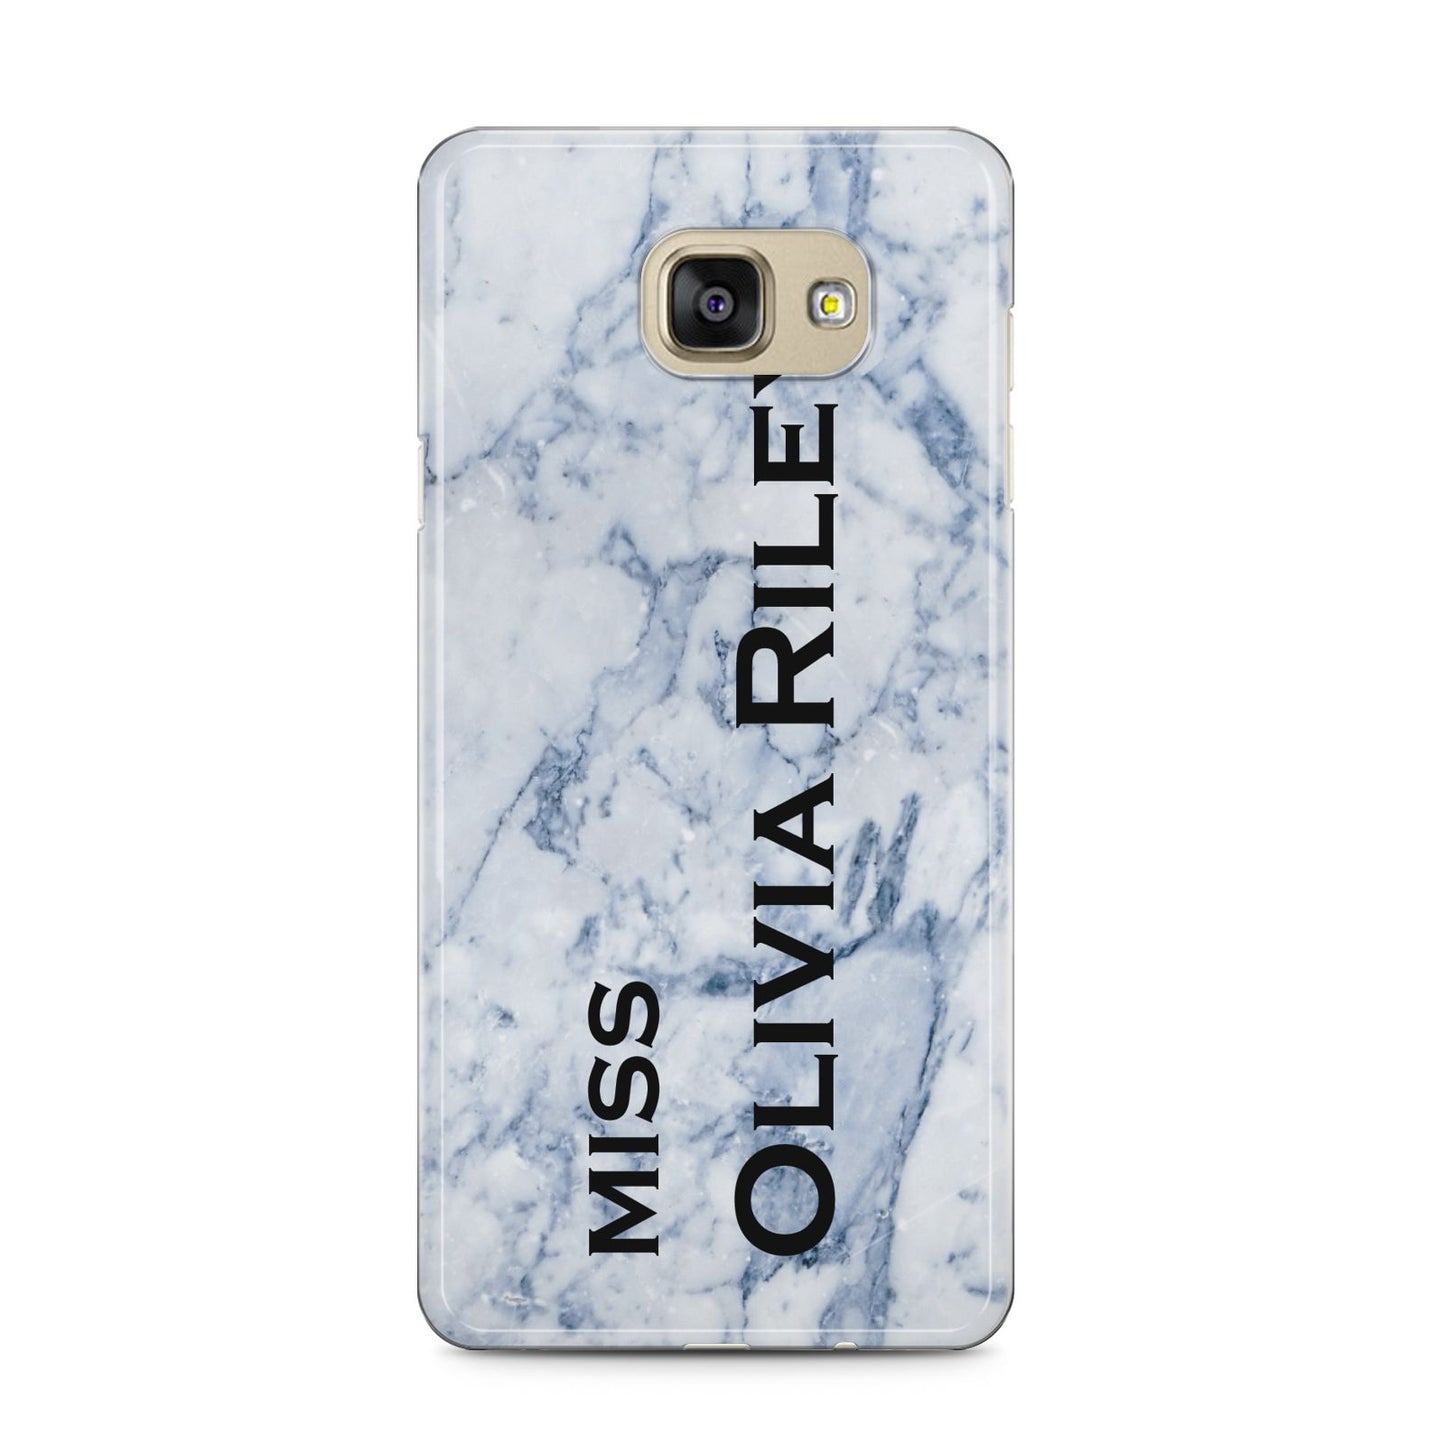 Full Name Grey Marble Samsung Galaxy A5 2016 Case on gold phone